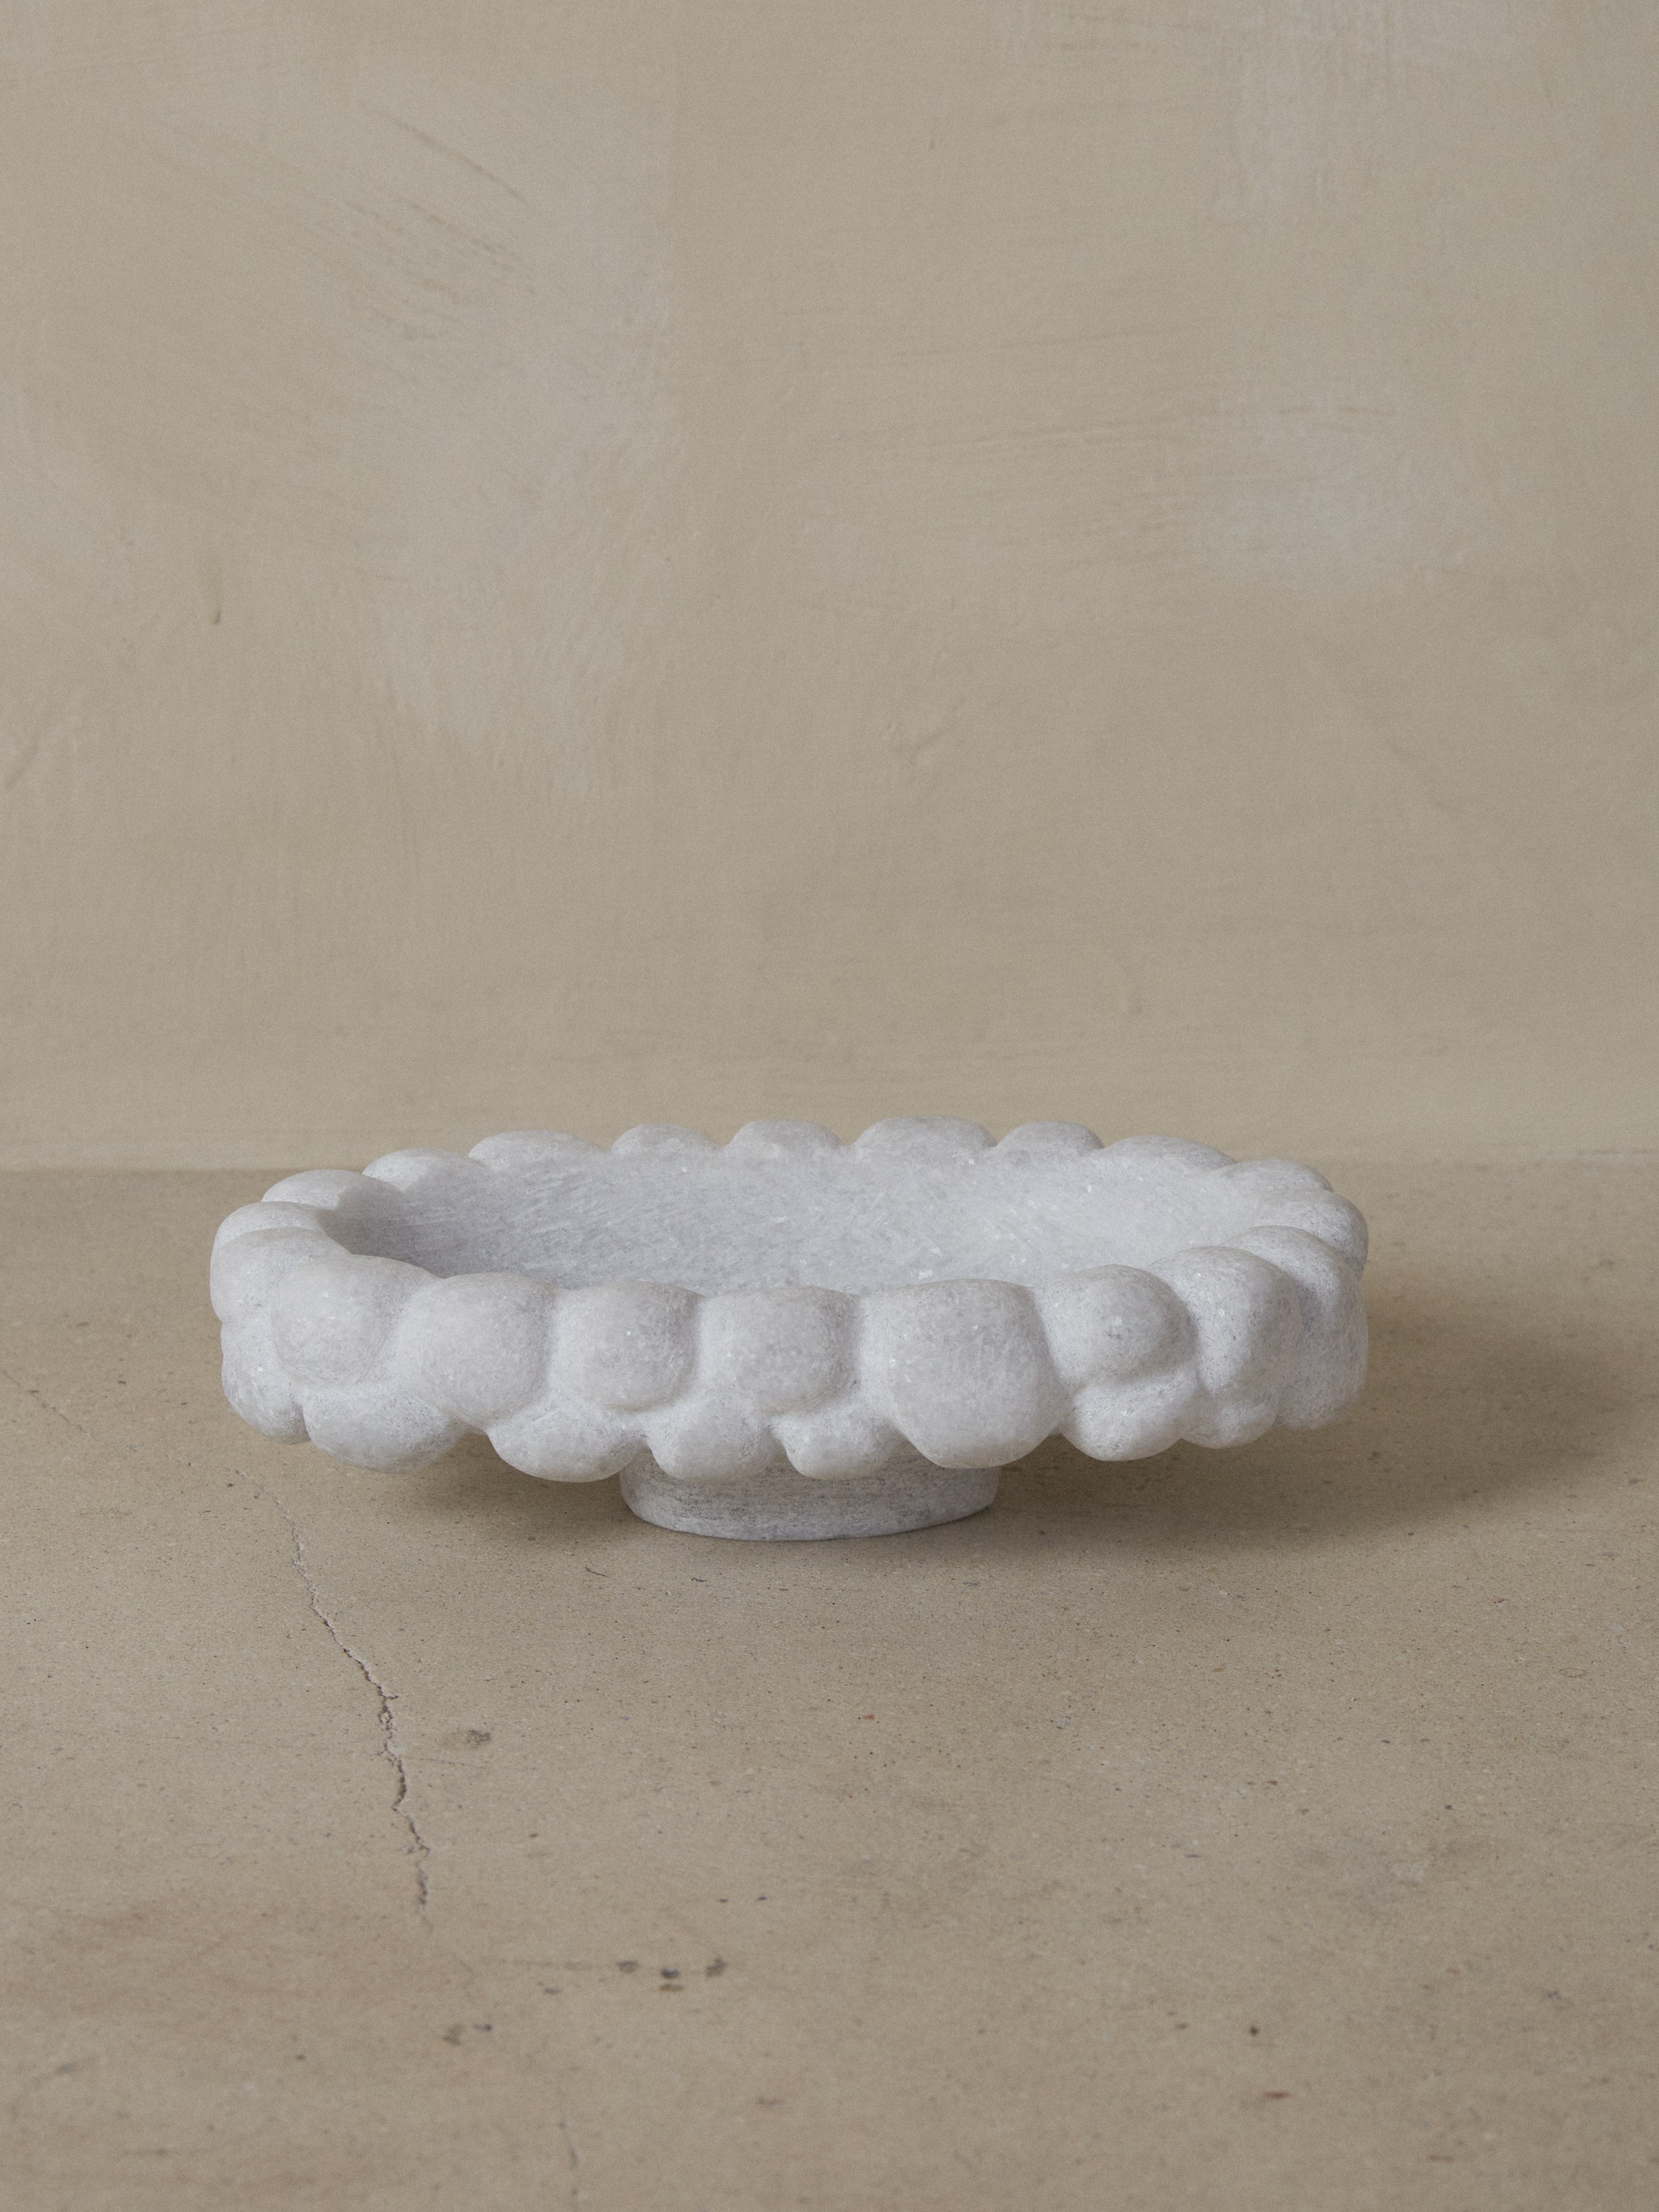 Crystalline Naxian marble hand sculpted into an oval footed bowl with a masculine, carved knotted edge and smooth interior. 